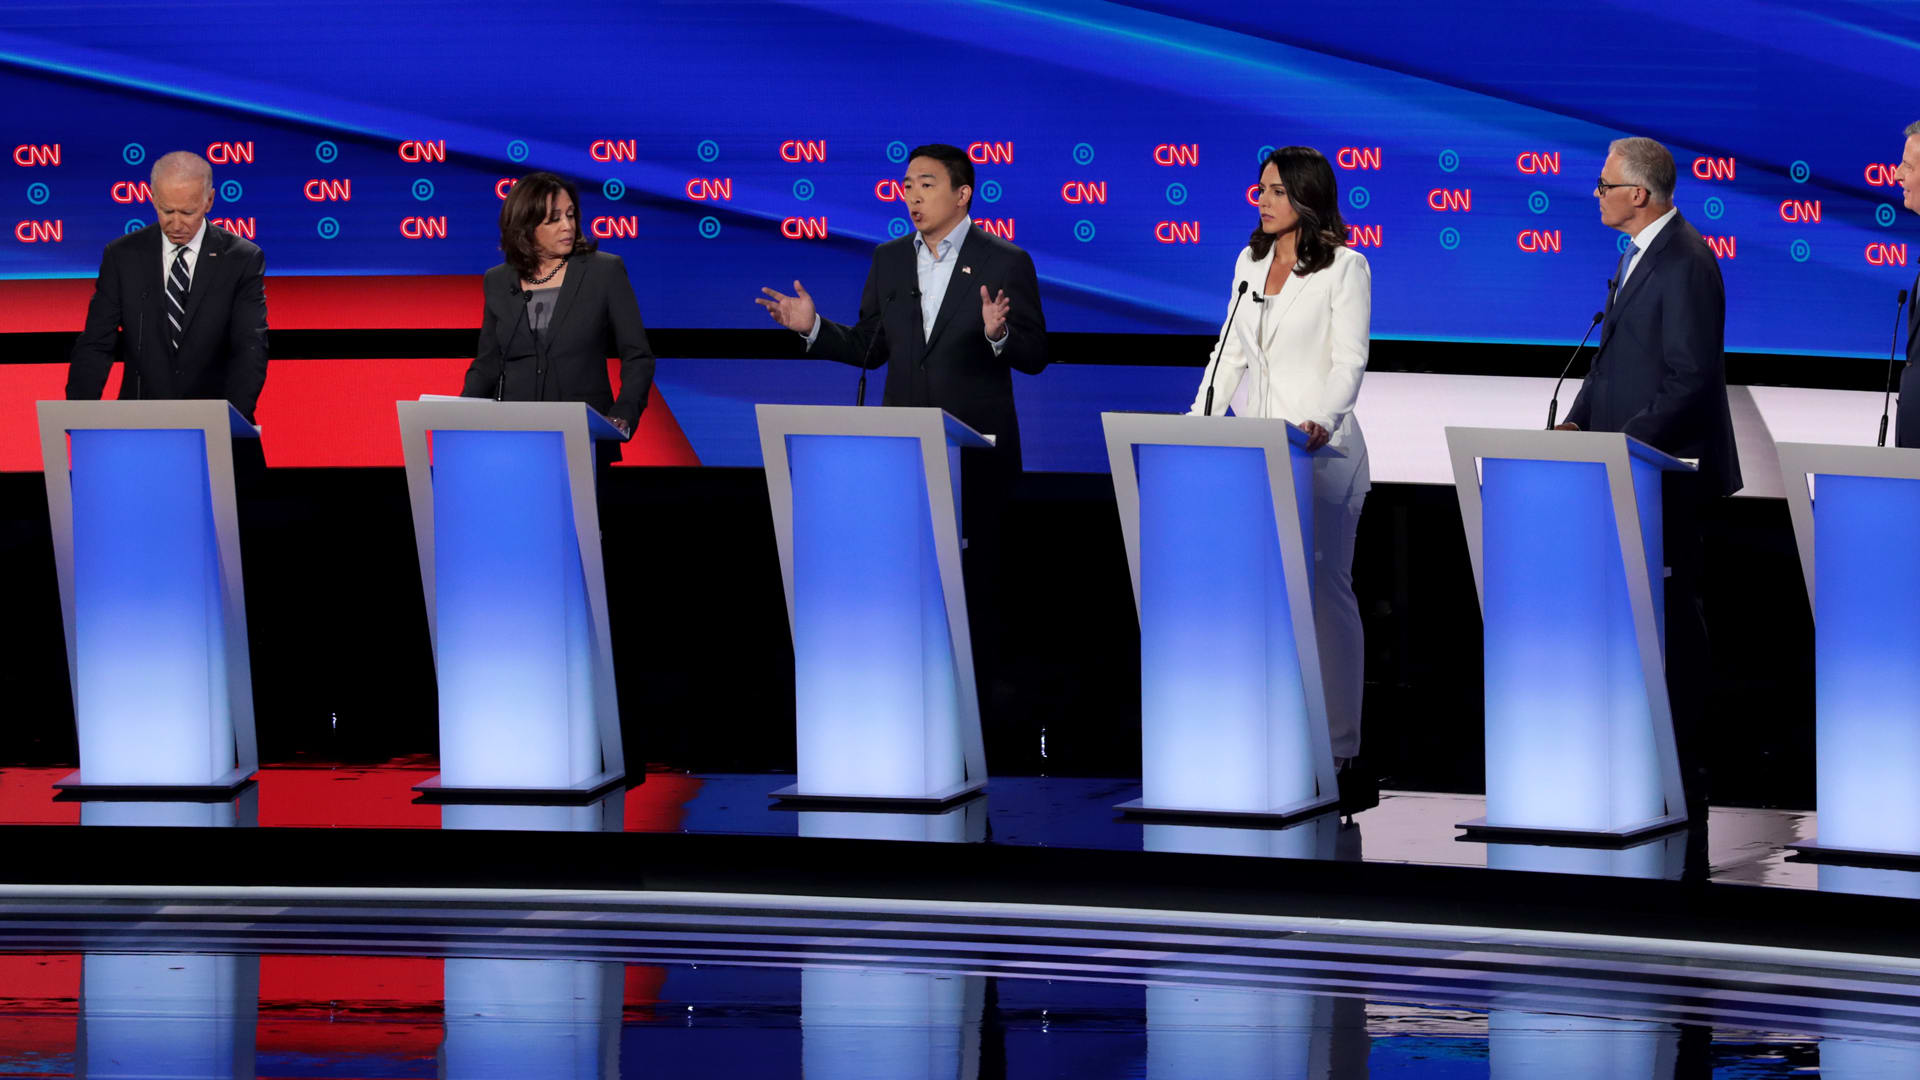 Democratic debate live stream: How to watch on ABC without cable